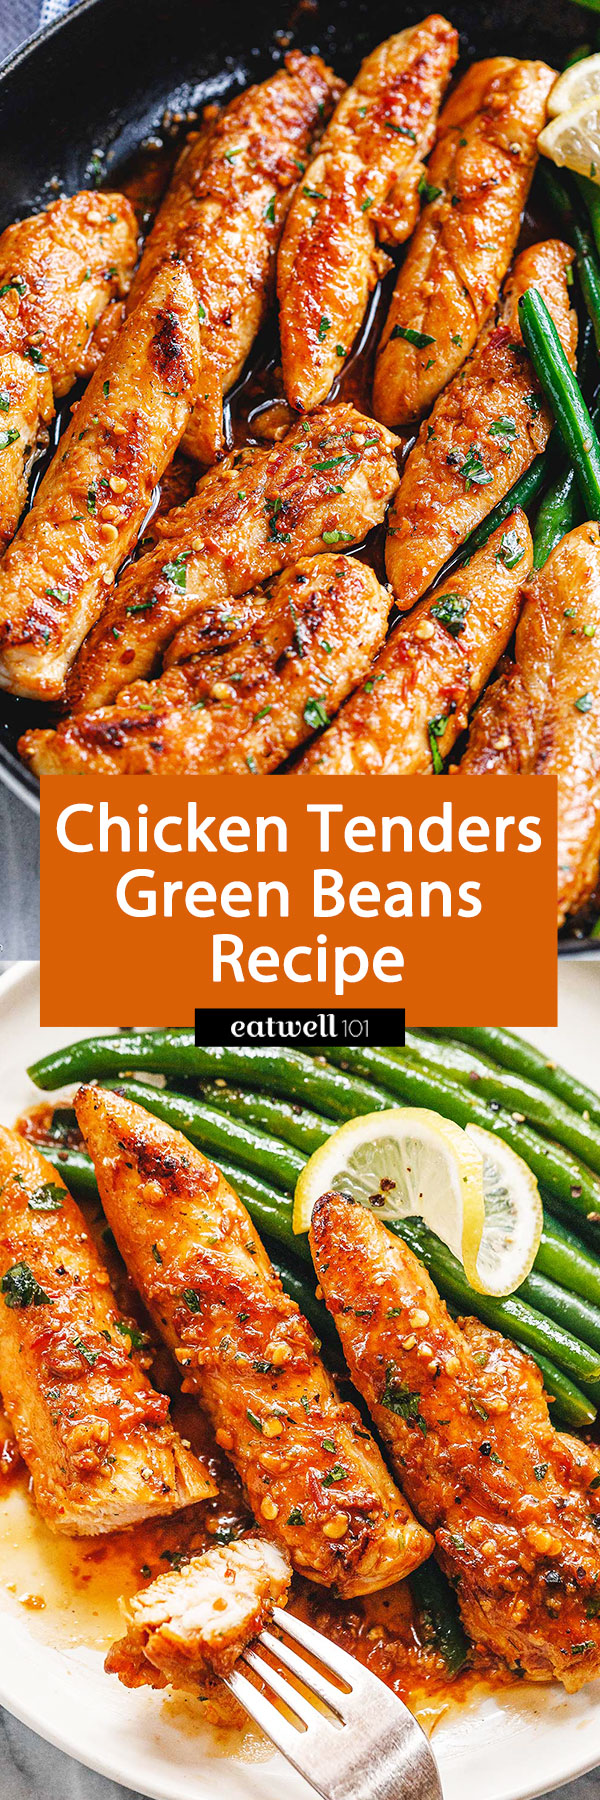 Lemon Garlic Butter Chicken Tenders and Green Beans Skillet - #chicken #greenbeans #recipe #eatwell101 - You'll make this chicken tenders and green beans recipe at least once a week when you realize how much everyone loves it!